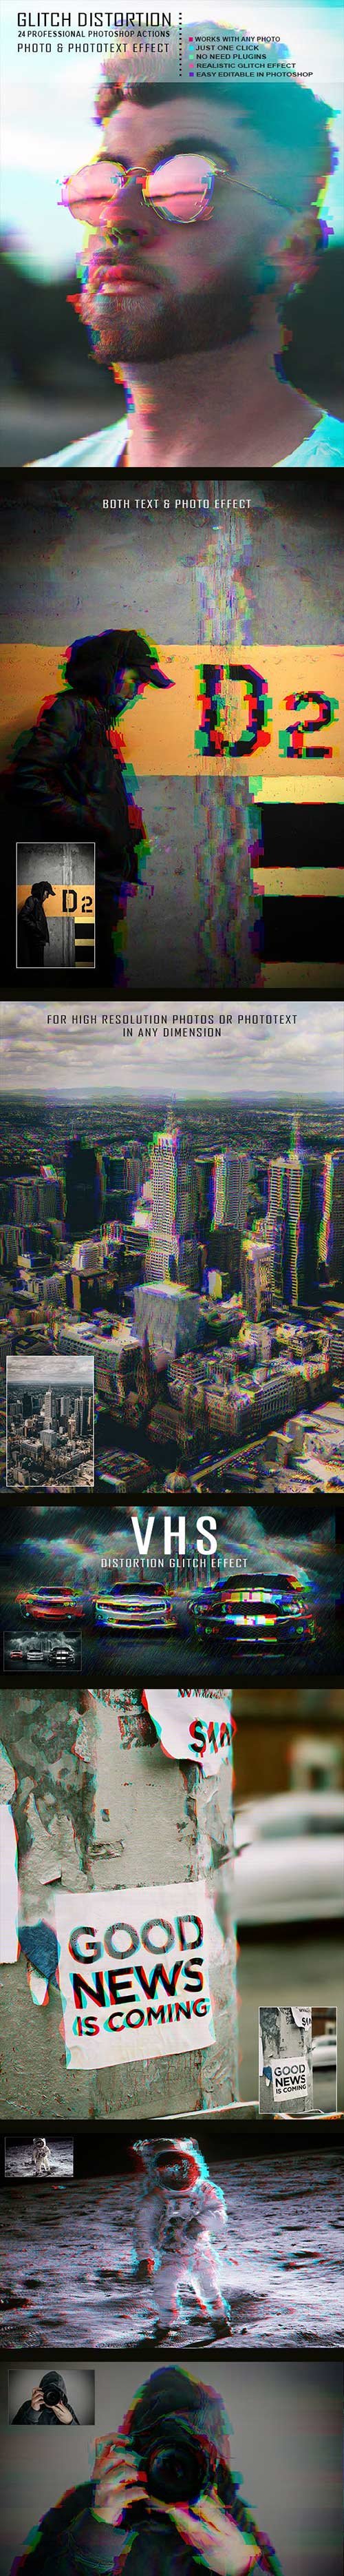 VHS Glitch Photo Text Effect - 24 PS Actions 23087929